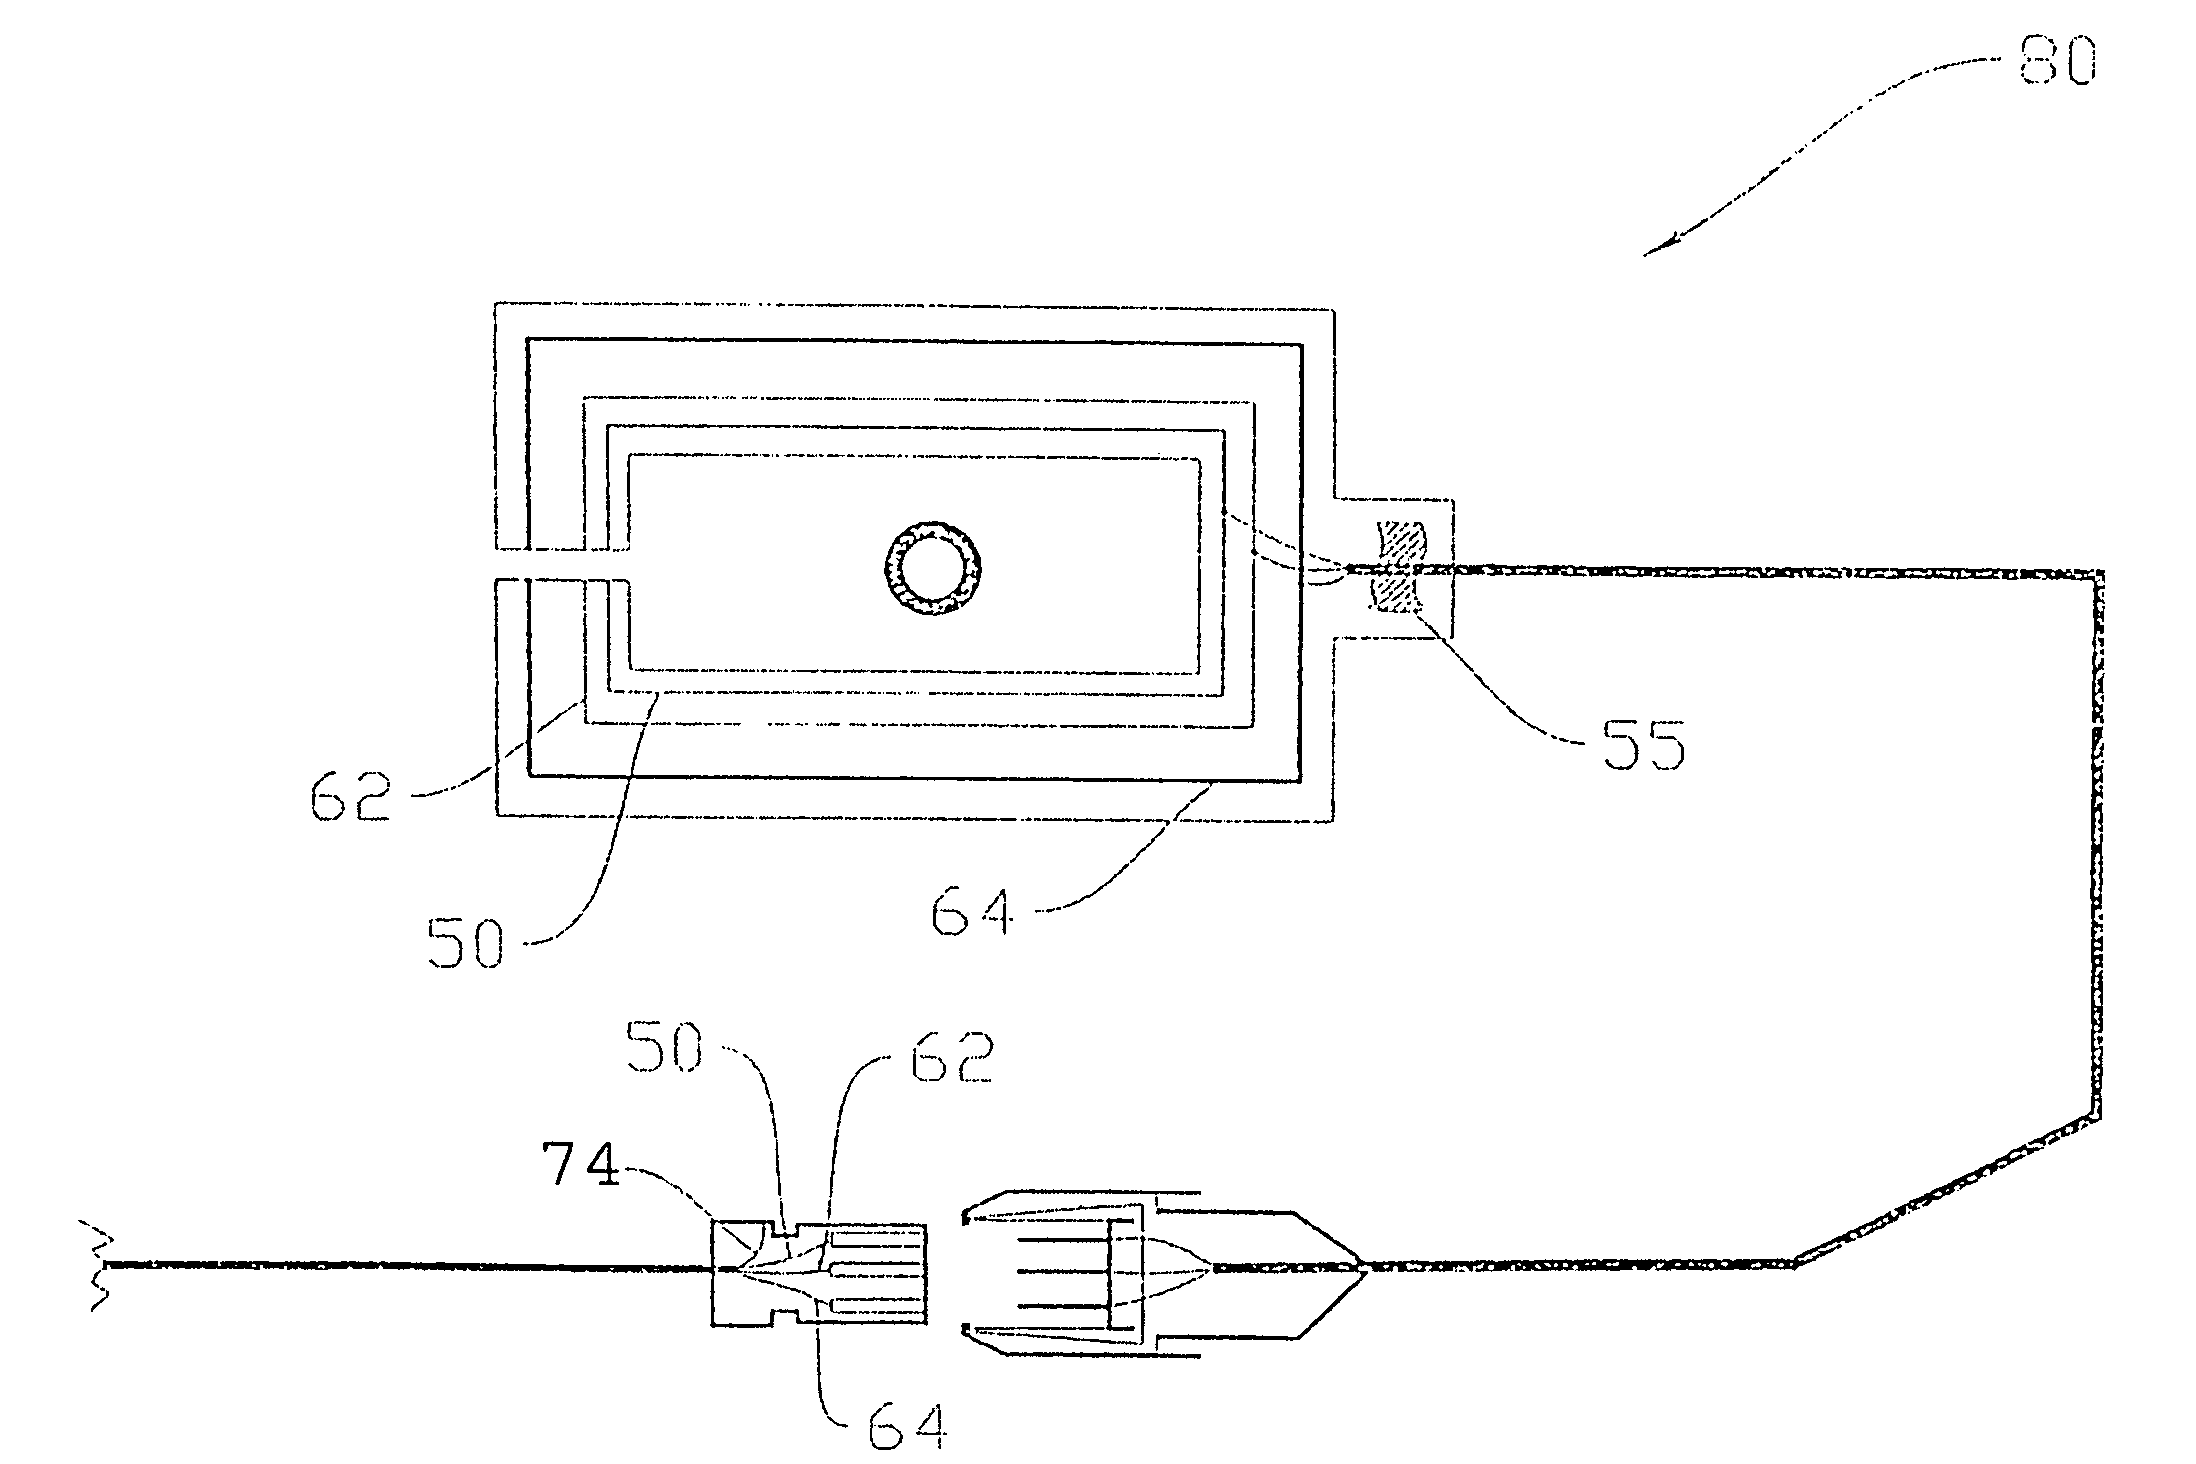 Dressing and integrated system for detection of fluid loss